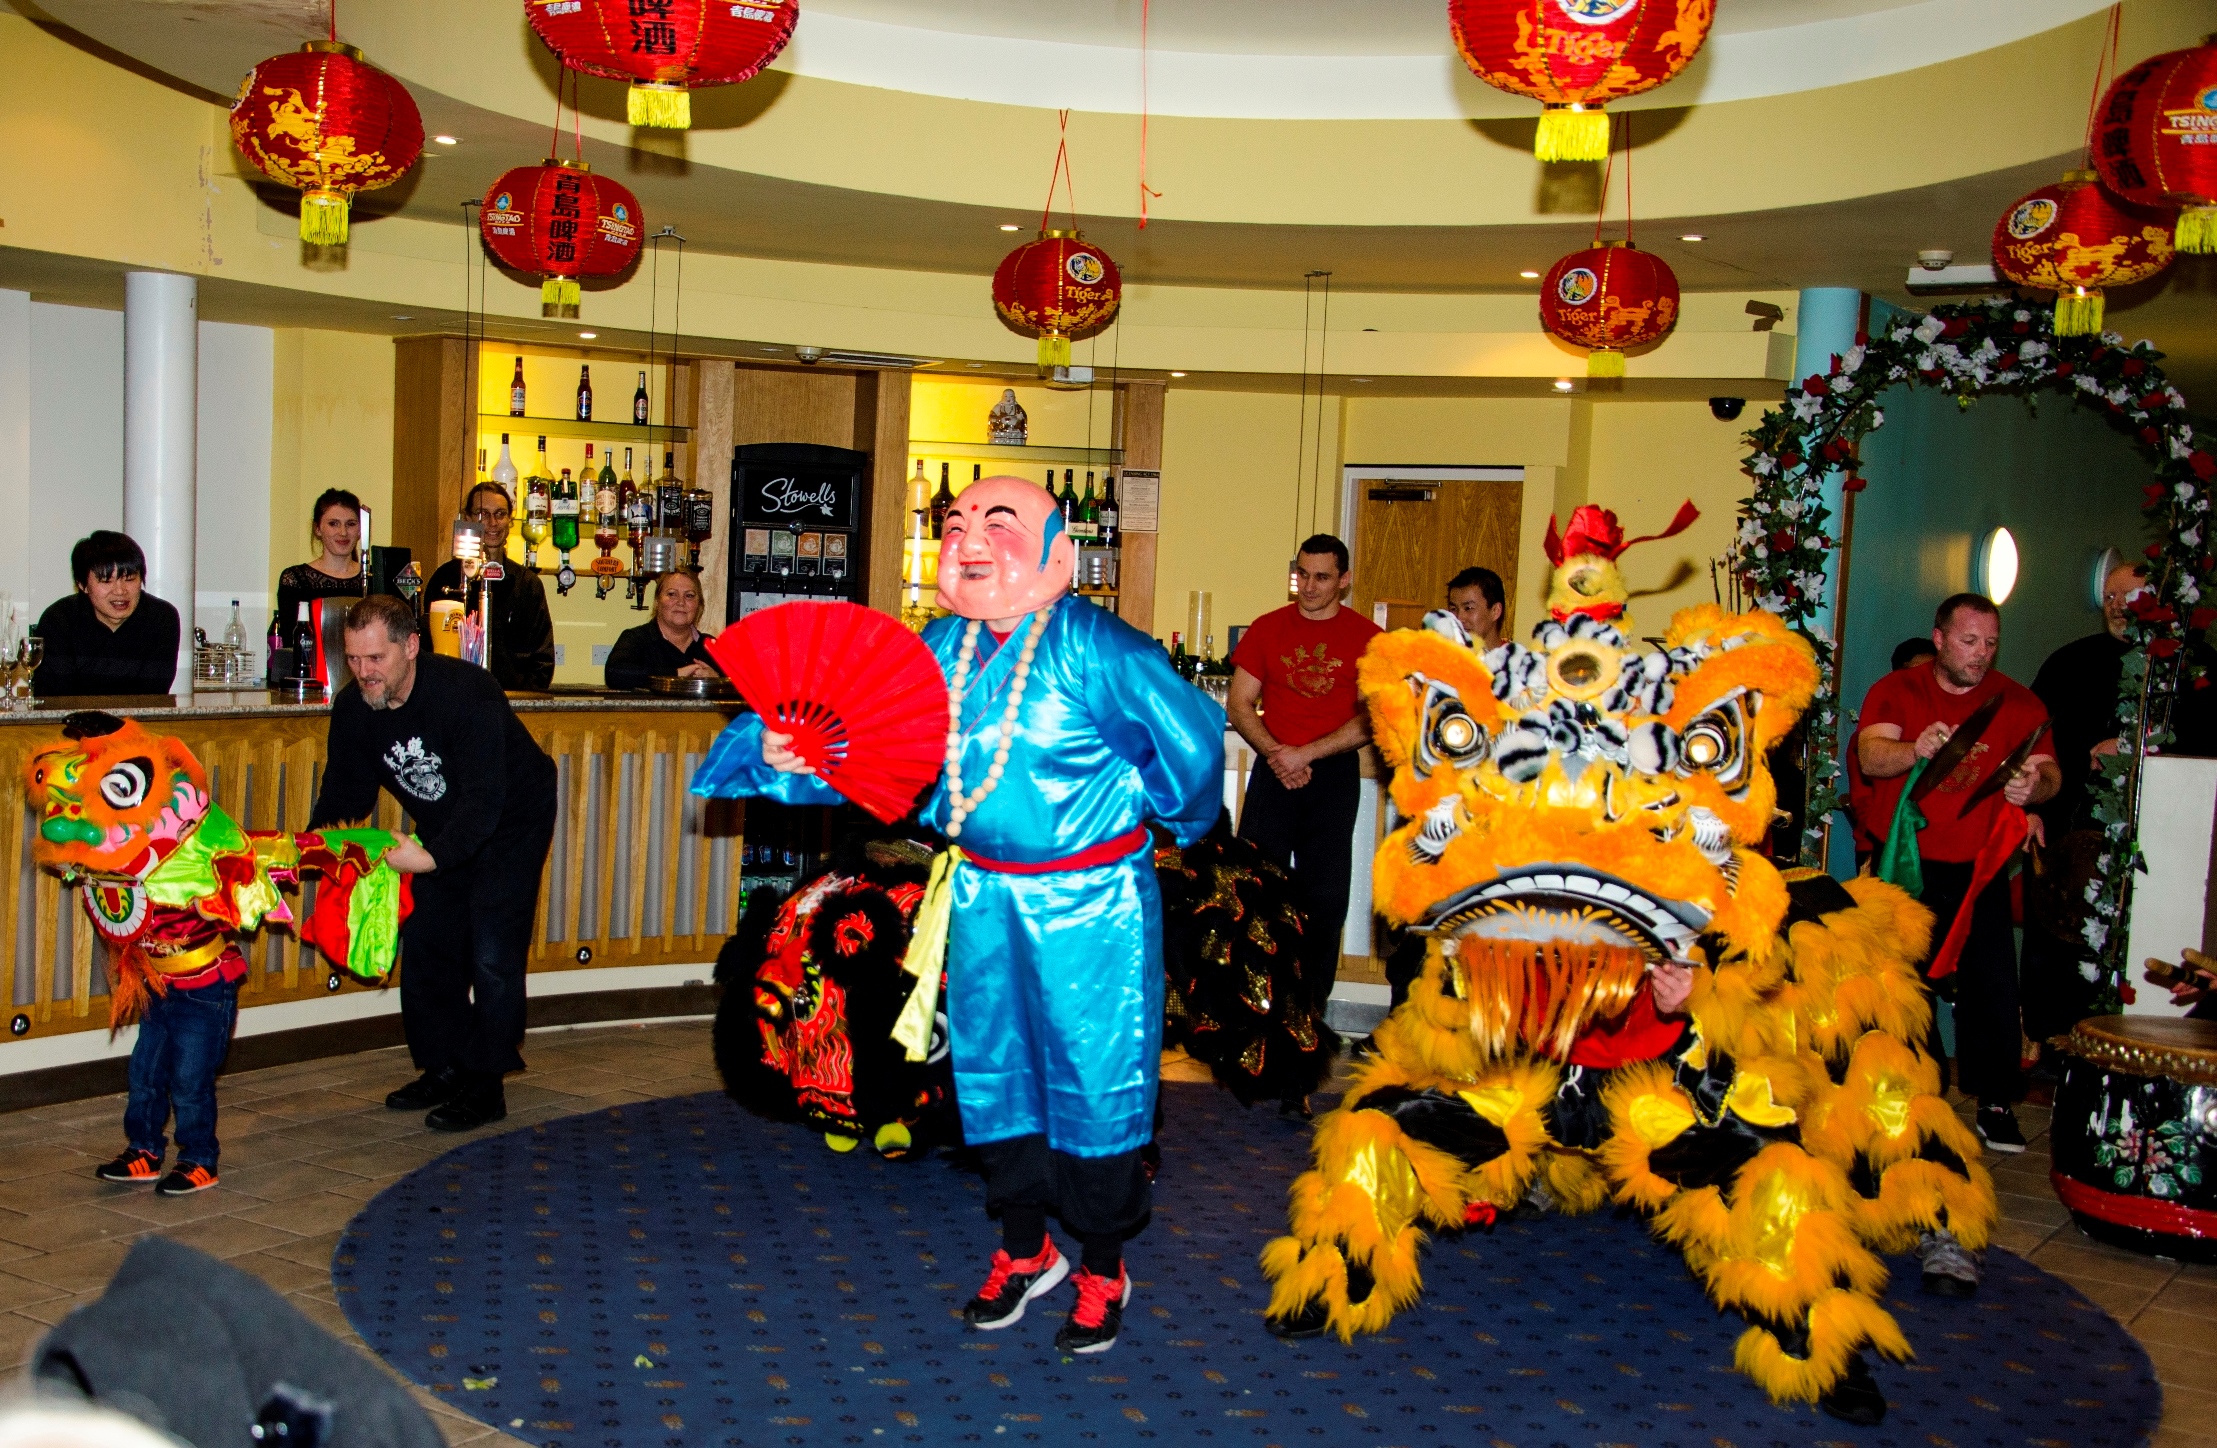  Guests at the Chung Ku were entertained by traditional Chinese lion dancing. 